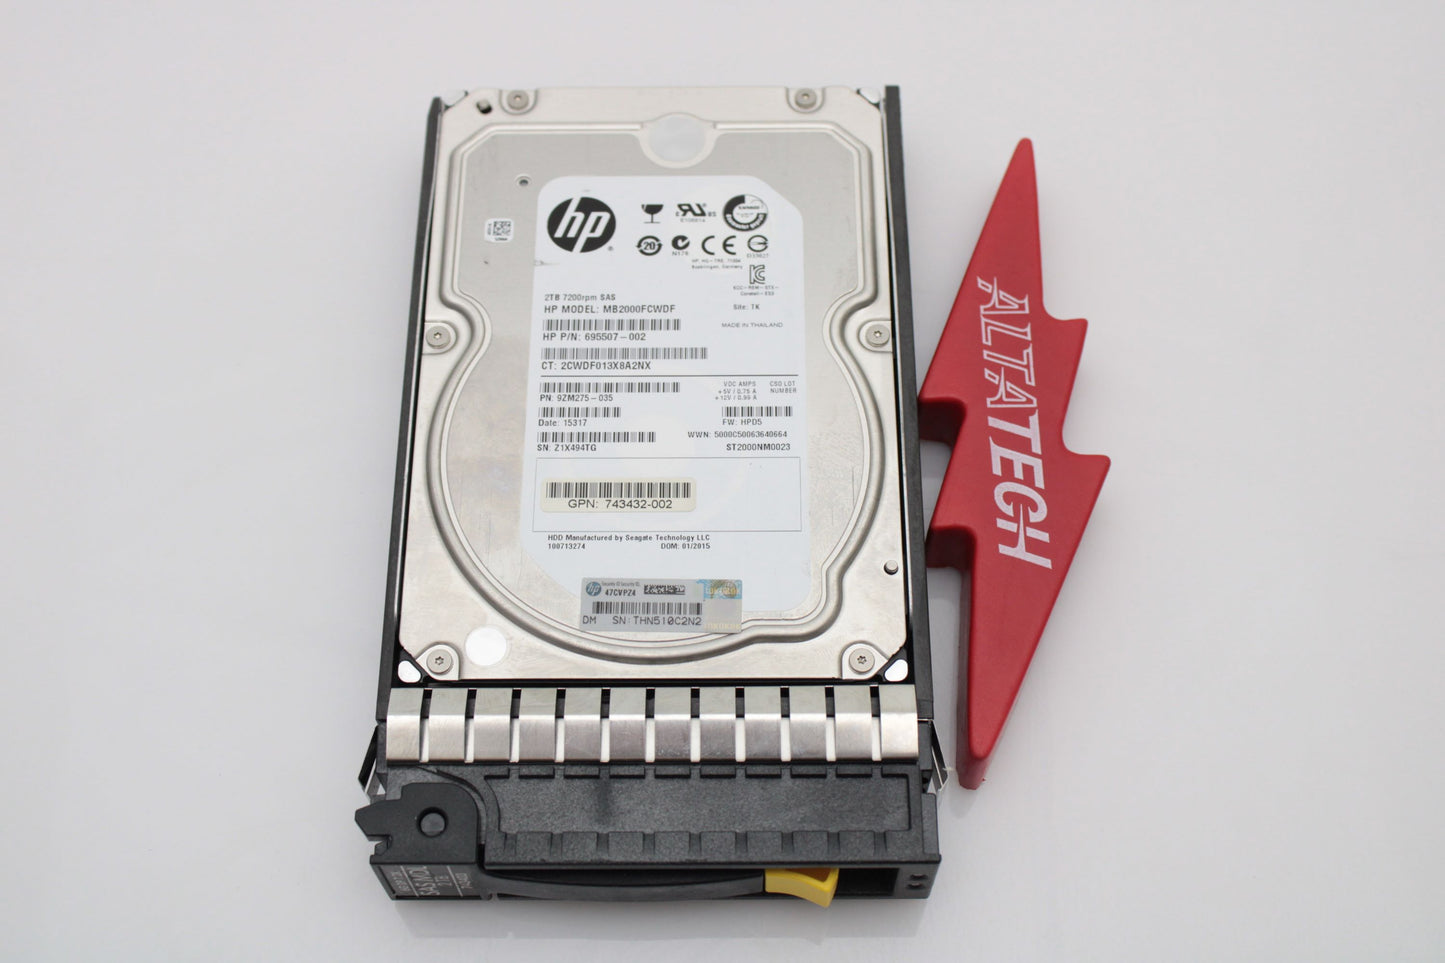 HP 743403-001 2TB SAS Hard Disk Drive 6GBps 7200rpm 3.5" Midline (H6Z67A), Used